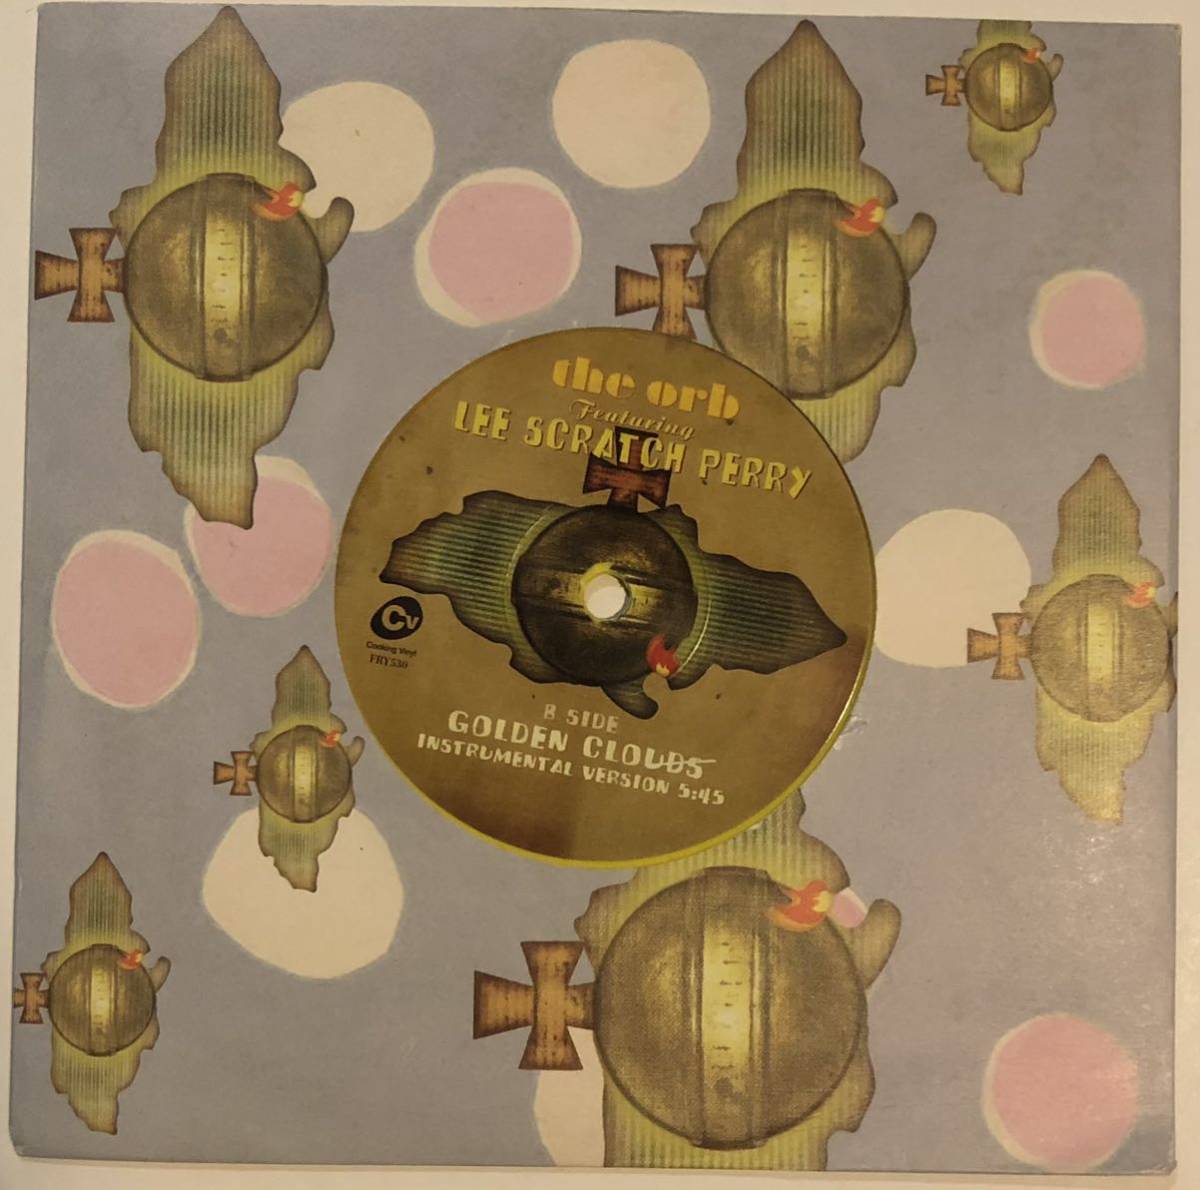 EP The Orb Featuring Lee Scratch Perry Golden Clouds / Cooking Vinyl FRY530 / UK_画像1